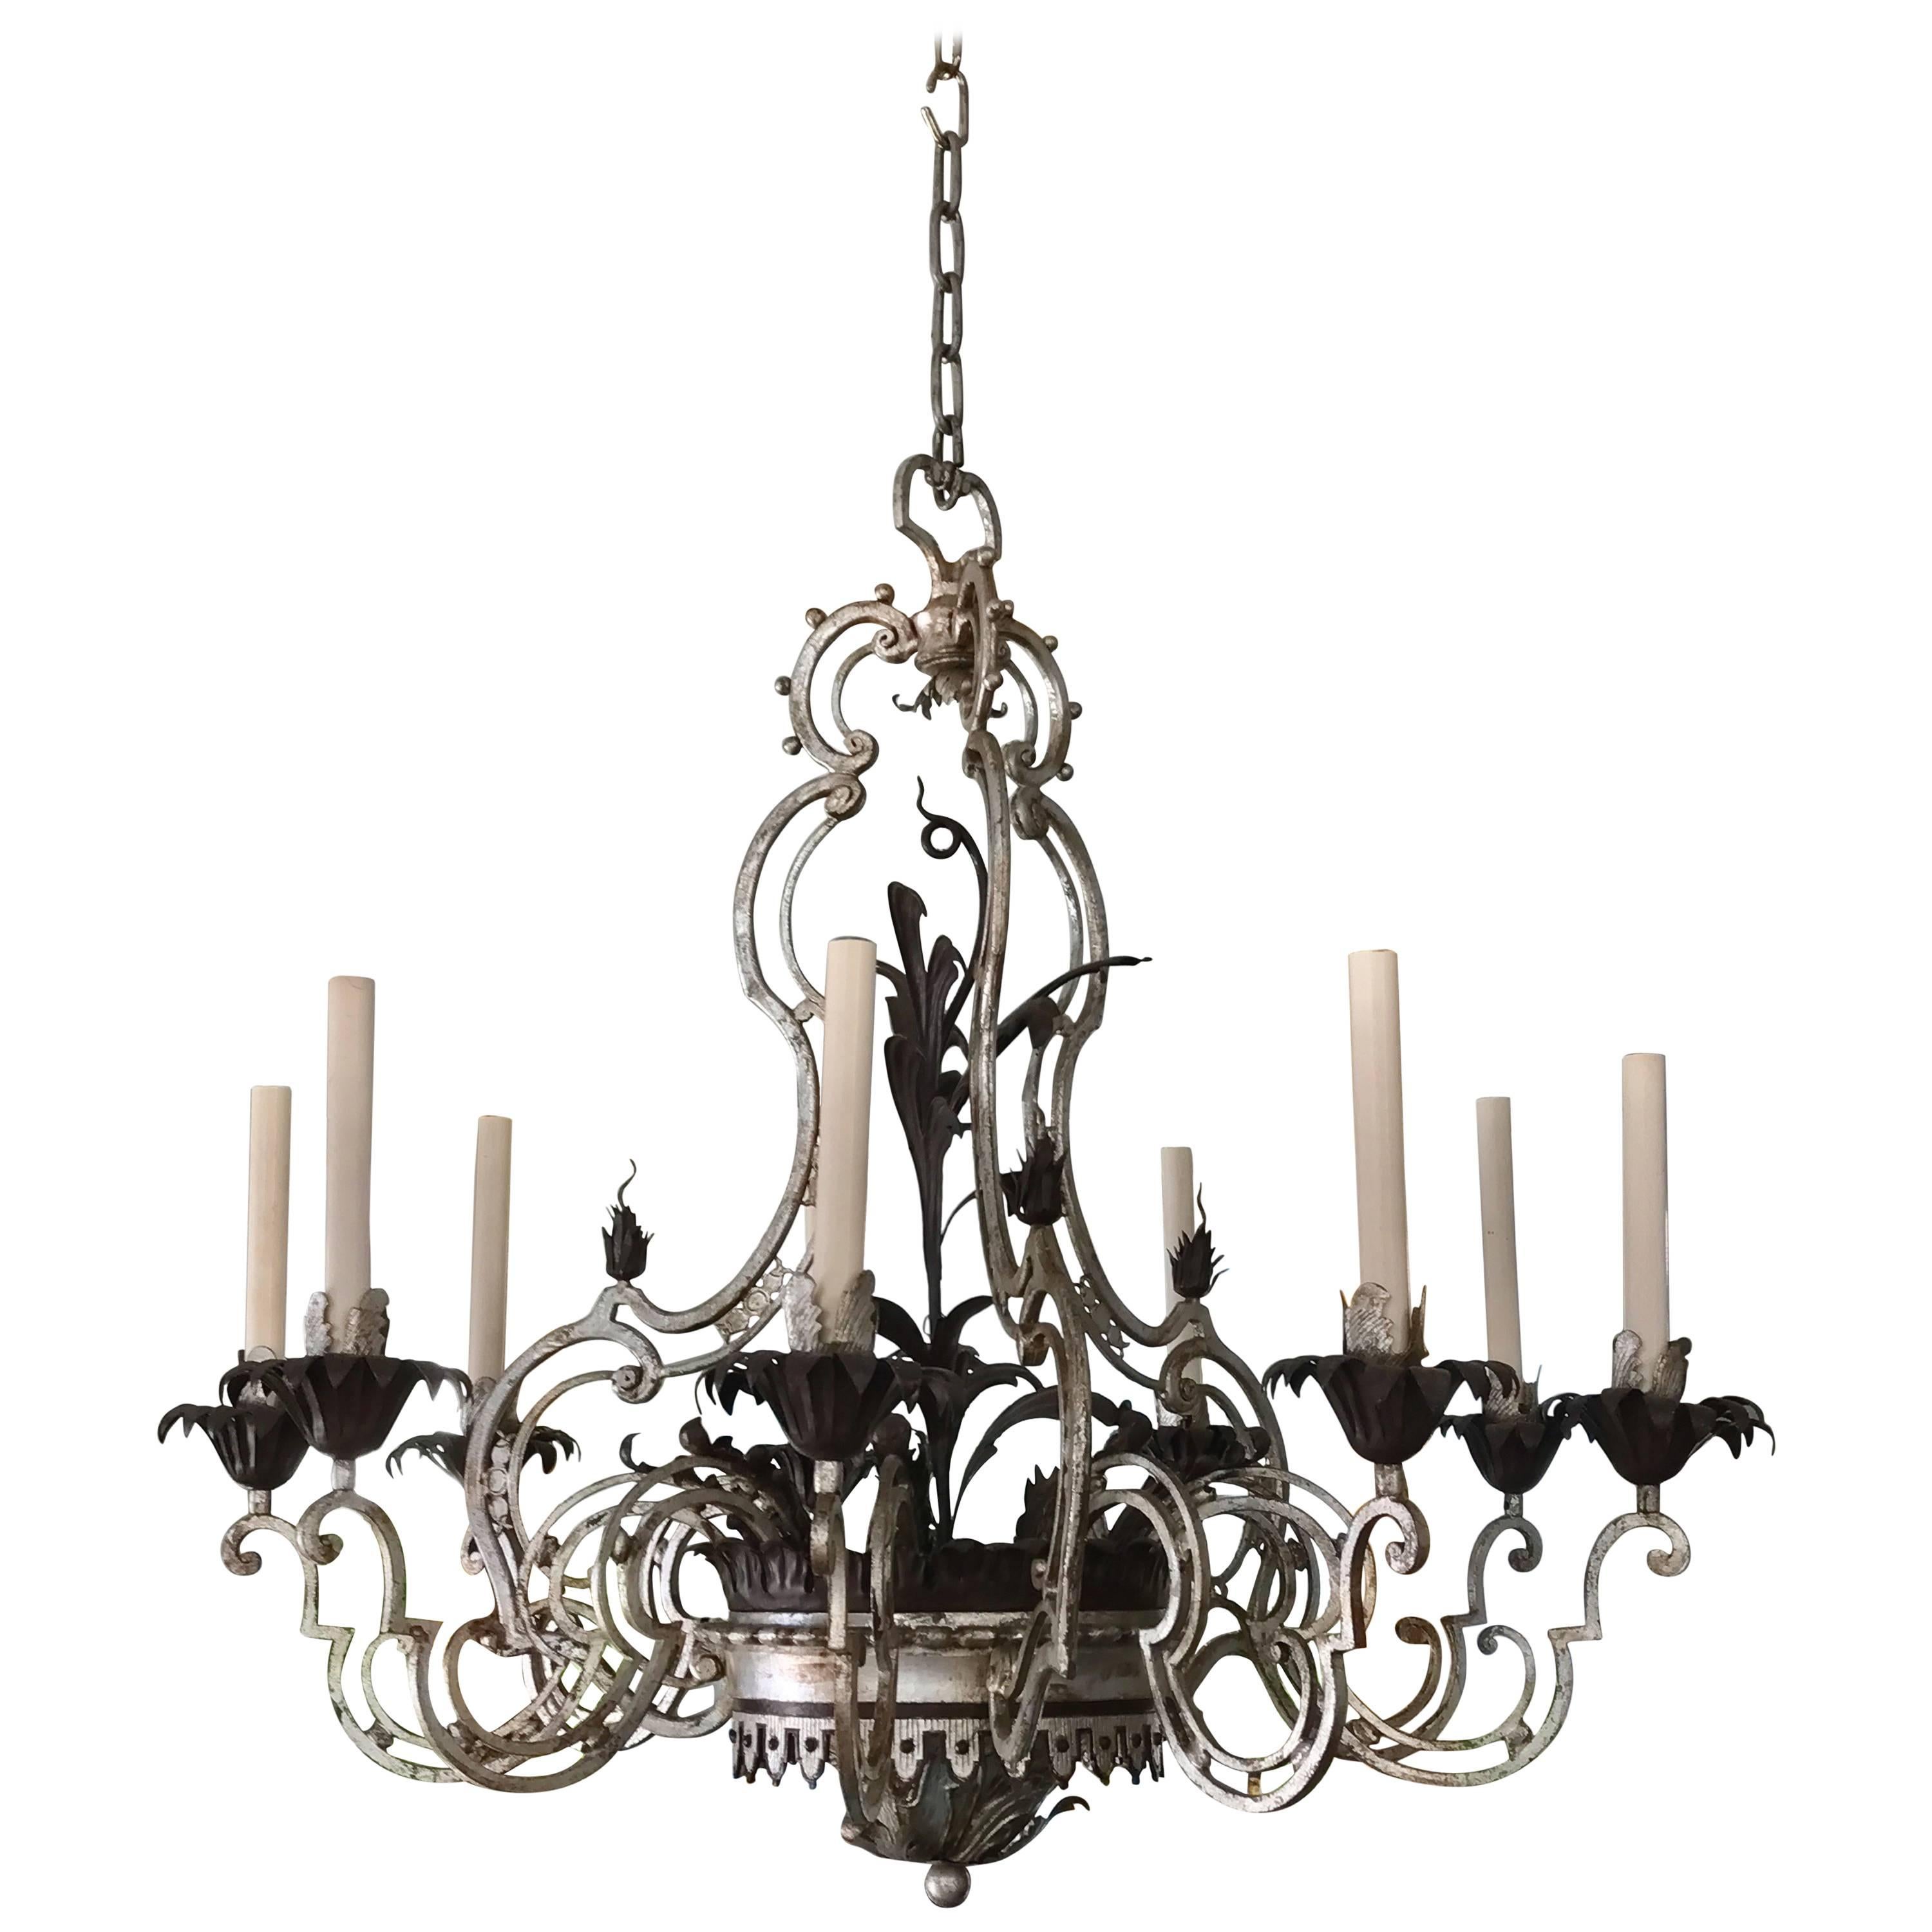 Hand Wrought Iron Chandelier For Sale